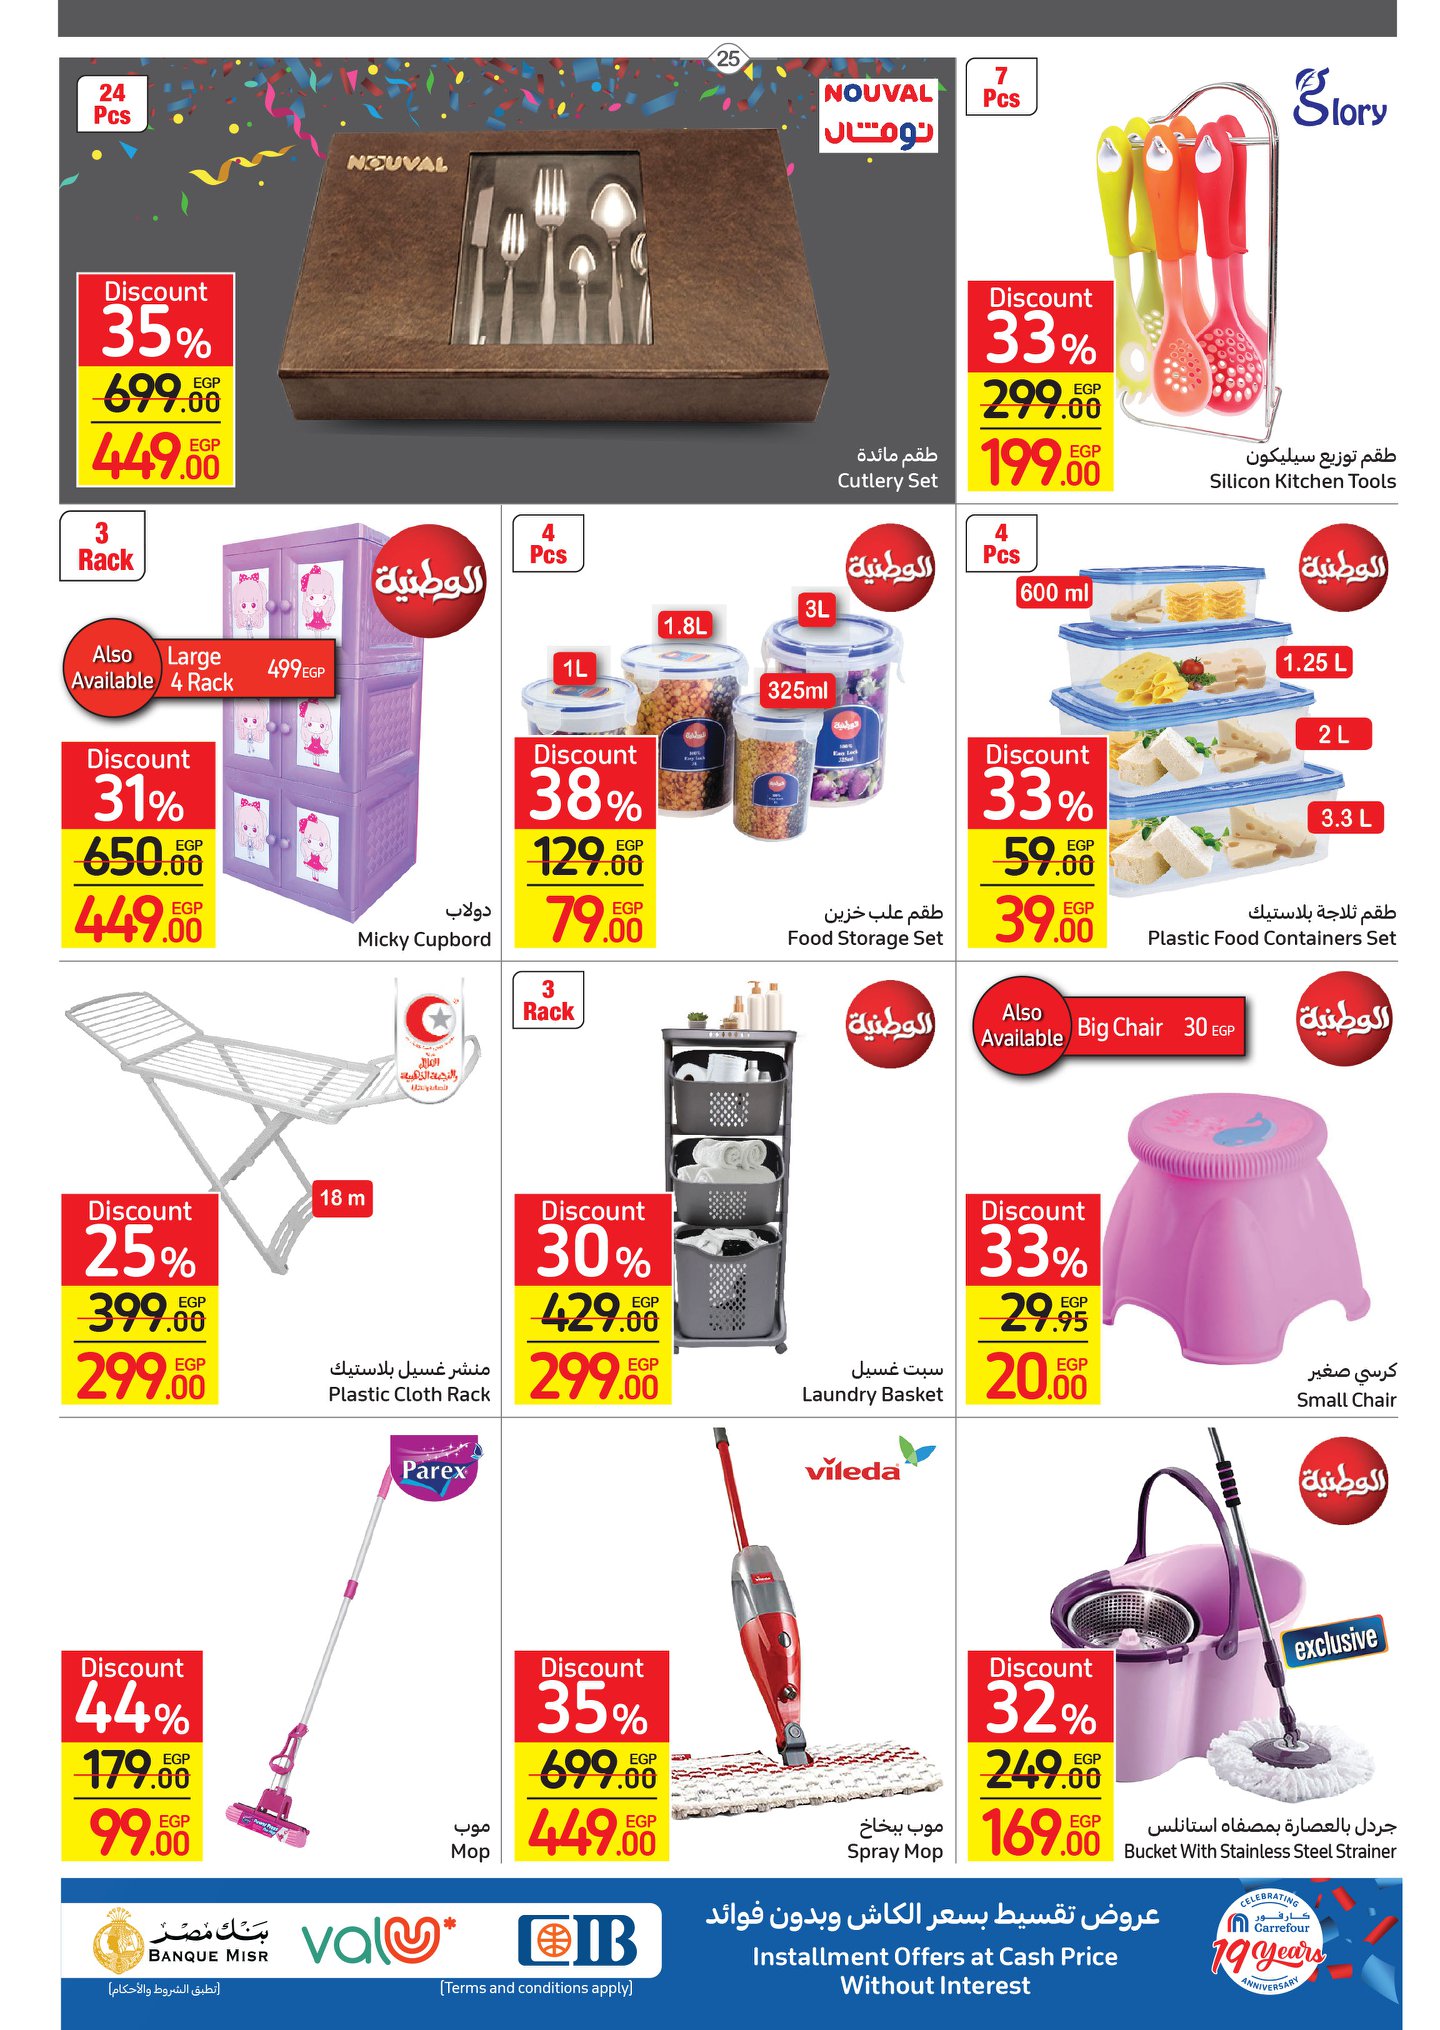 Carrefour magazine offers complete with 50% discounts and a surprise purchase in convenient installments without interest 30